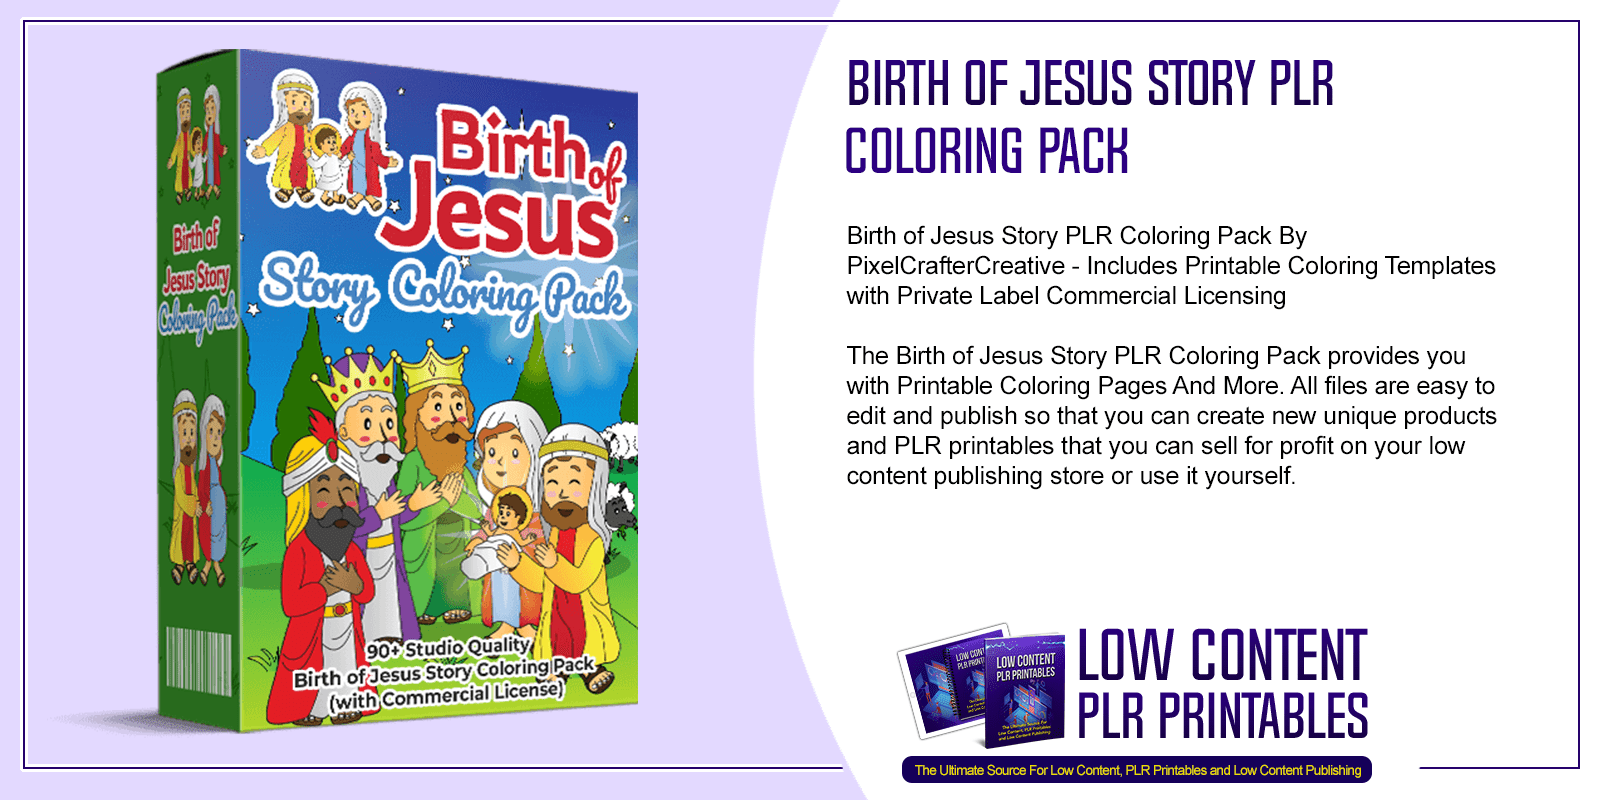 Birth of Jesus Story PLR Coloring Pack